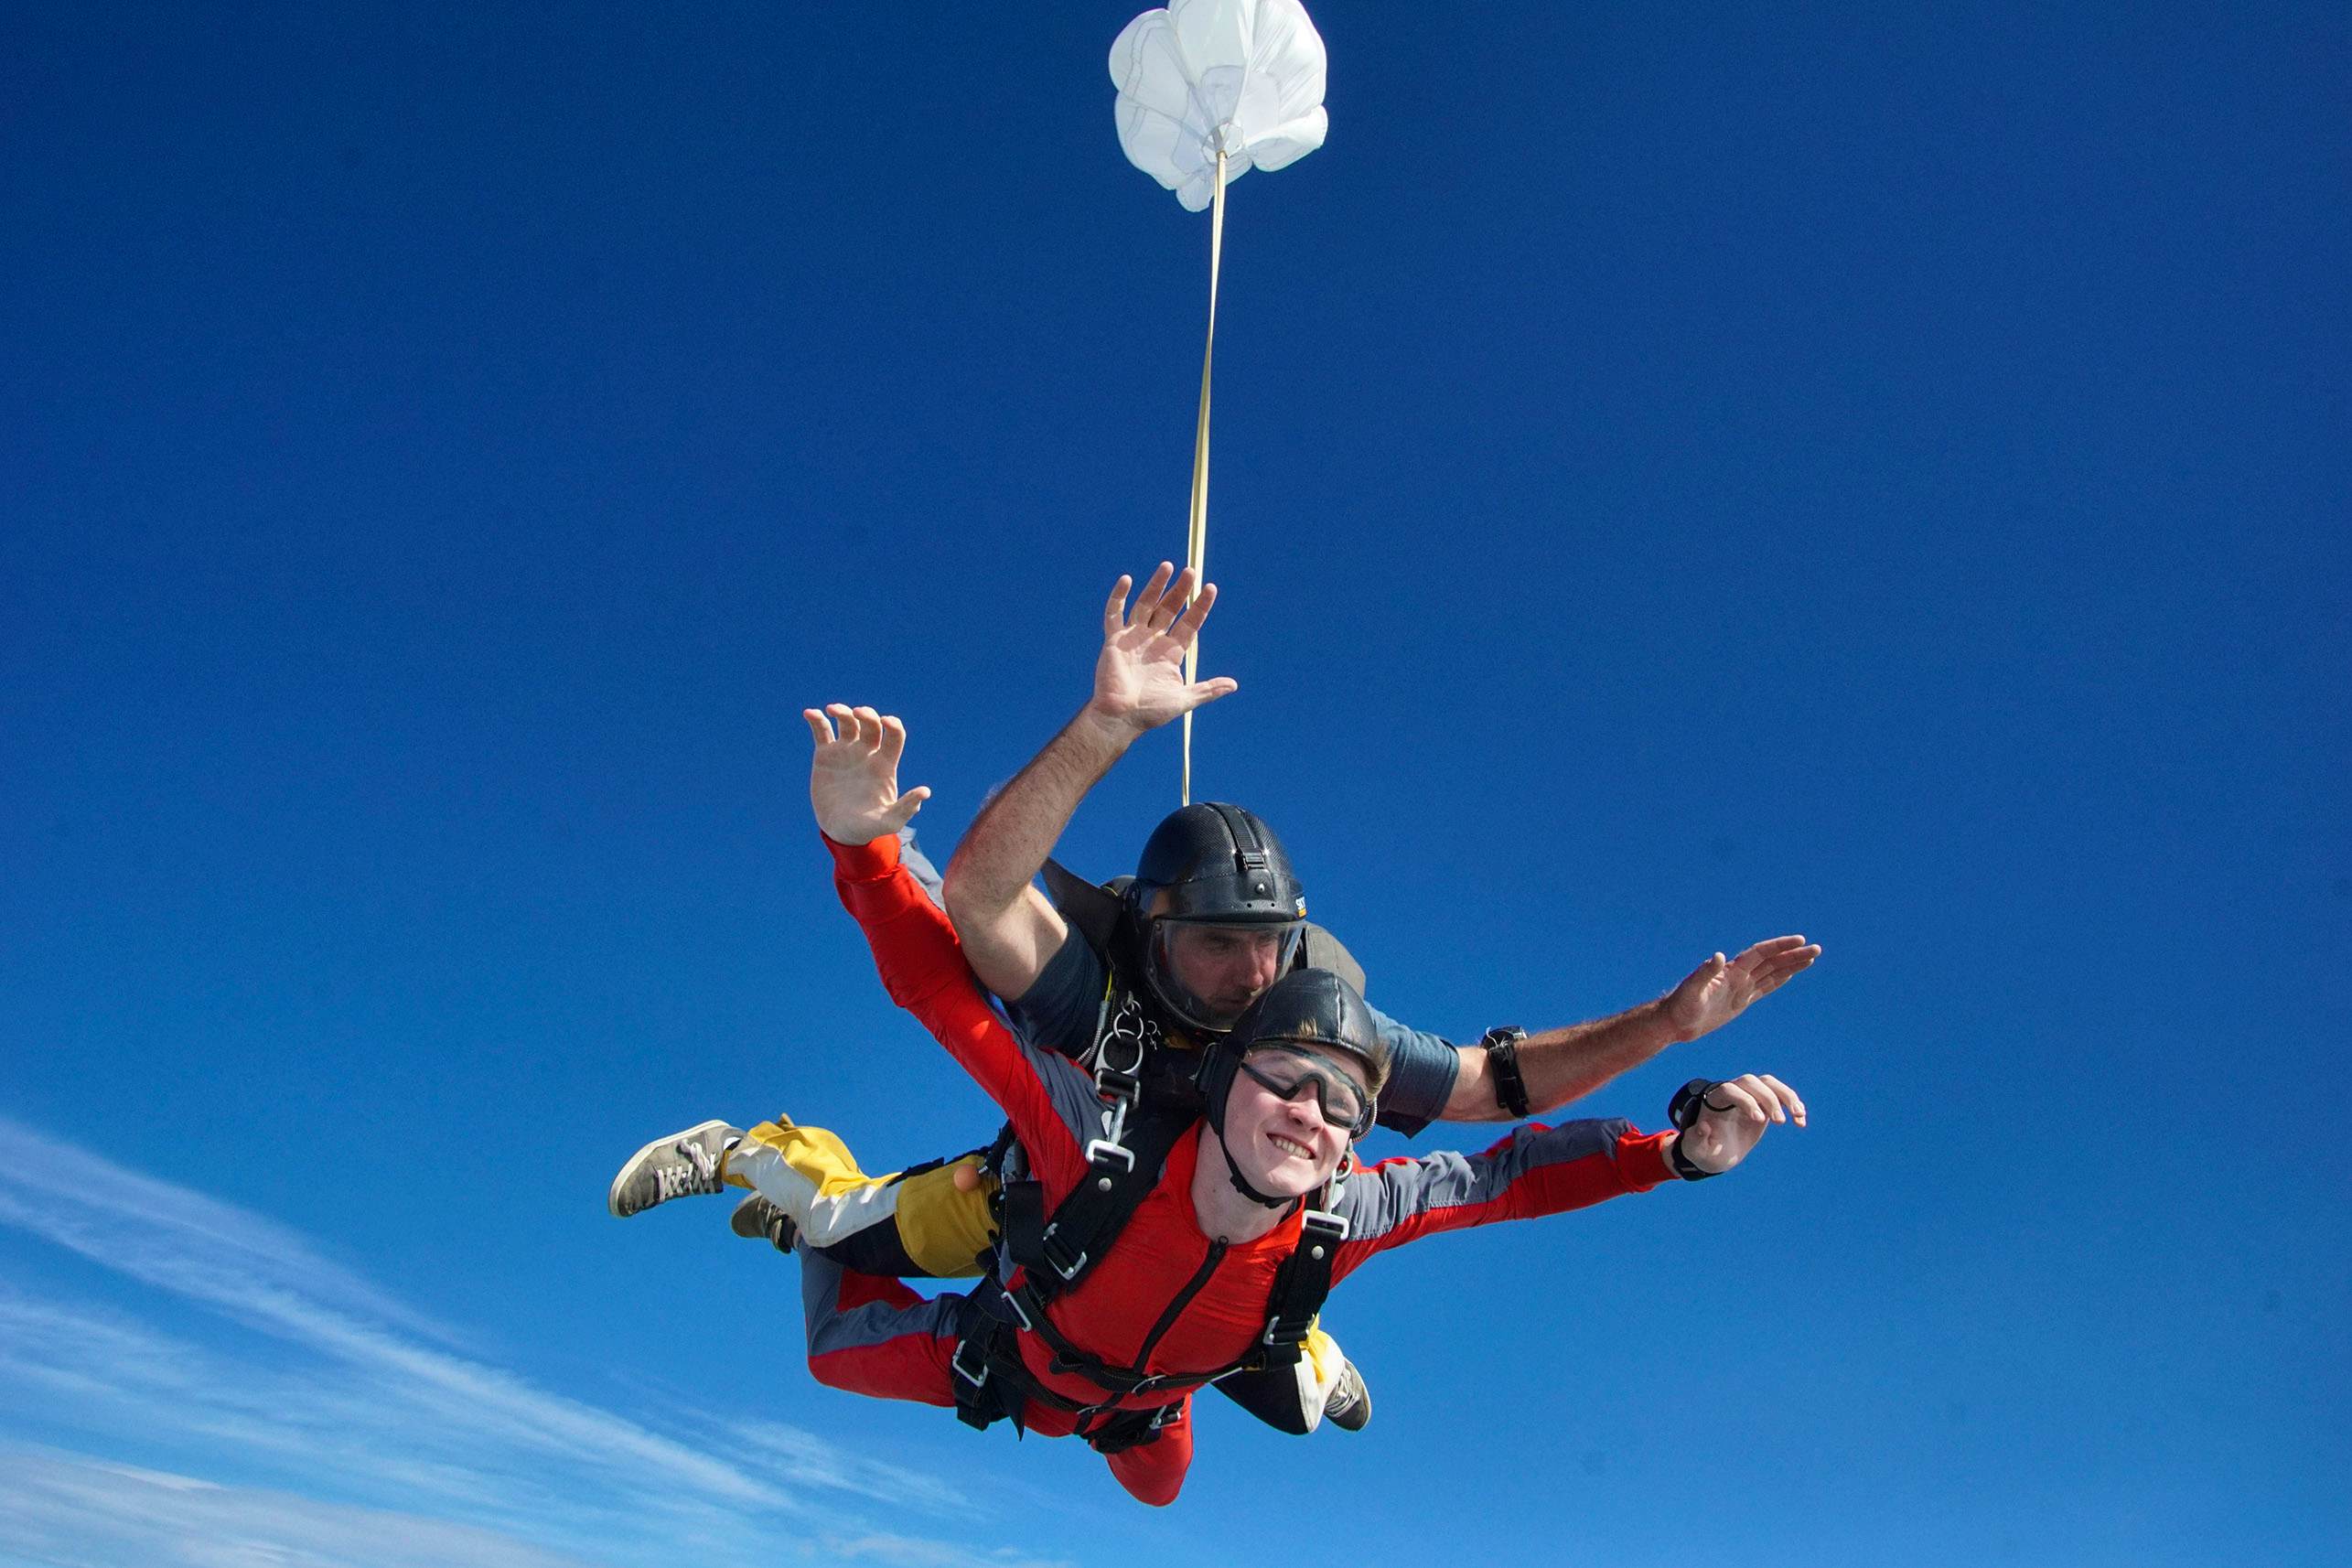 Tandem Skydive over Lake Wanaka exposed to its mesmerizing views from 15,000 ft